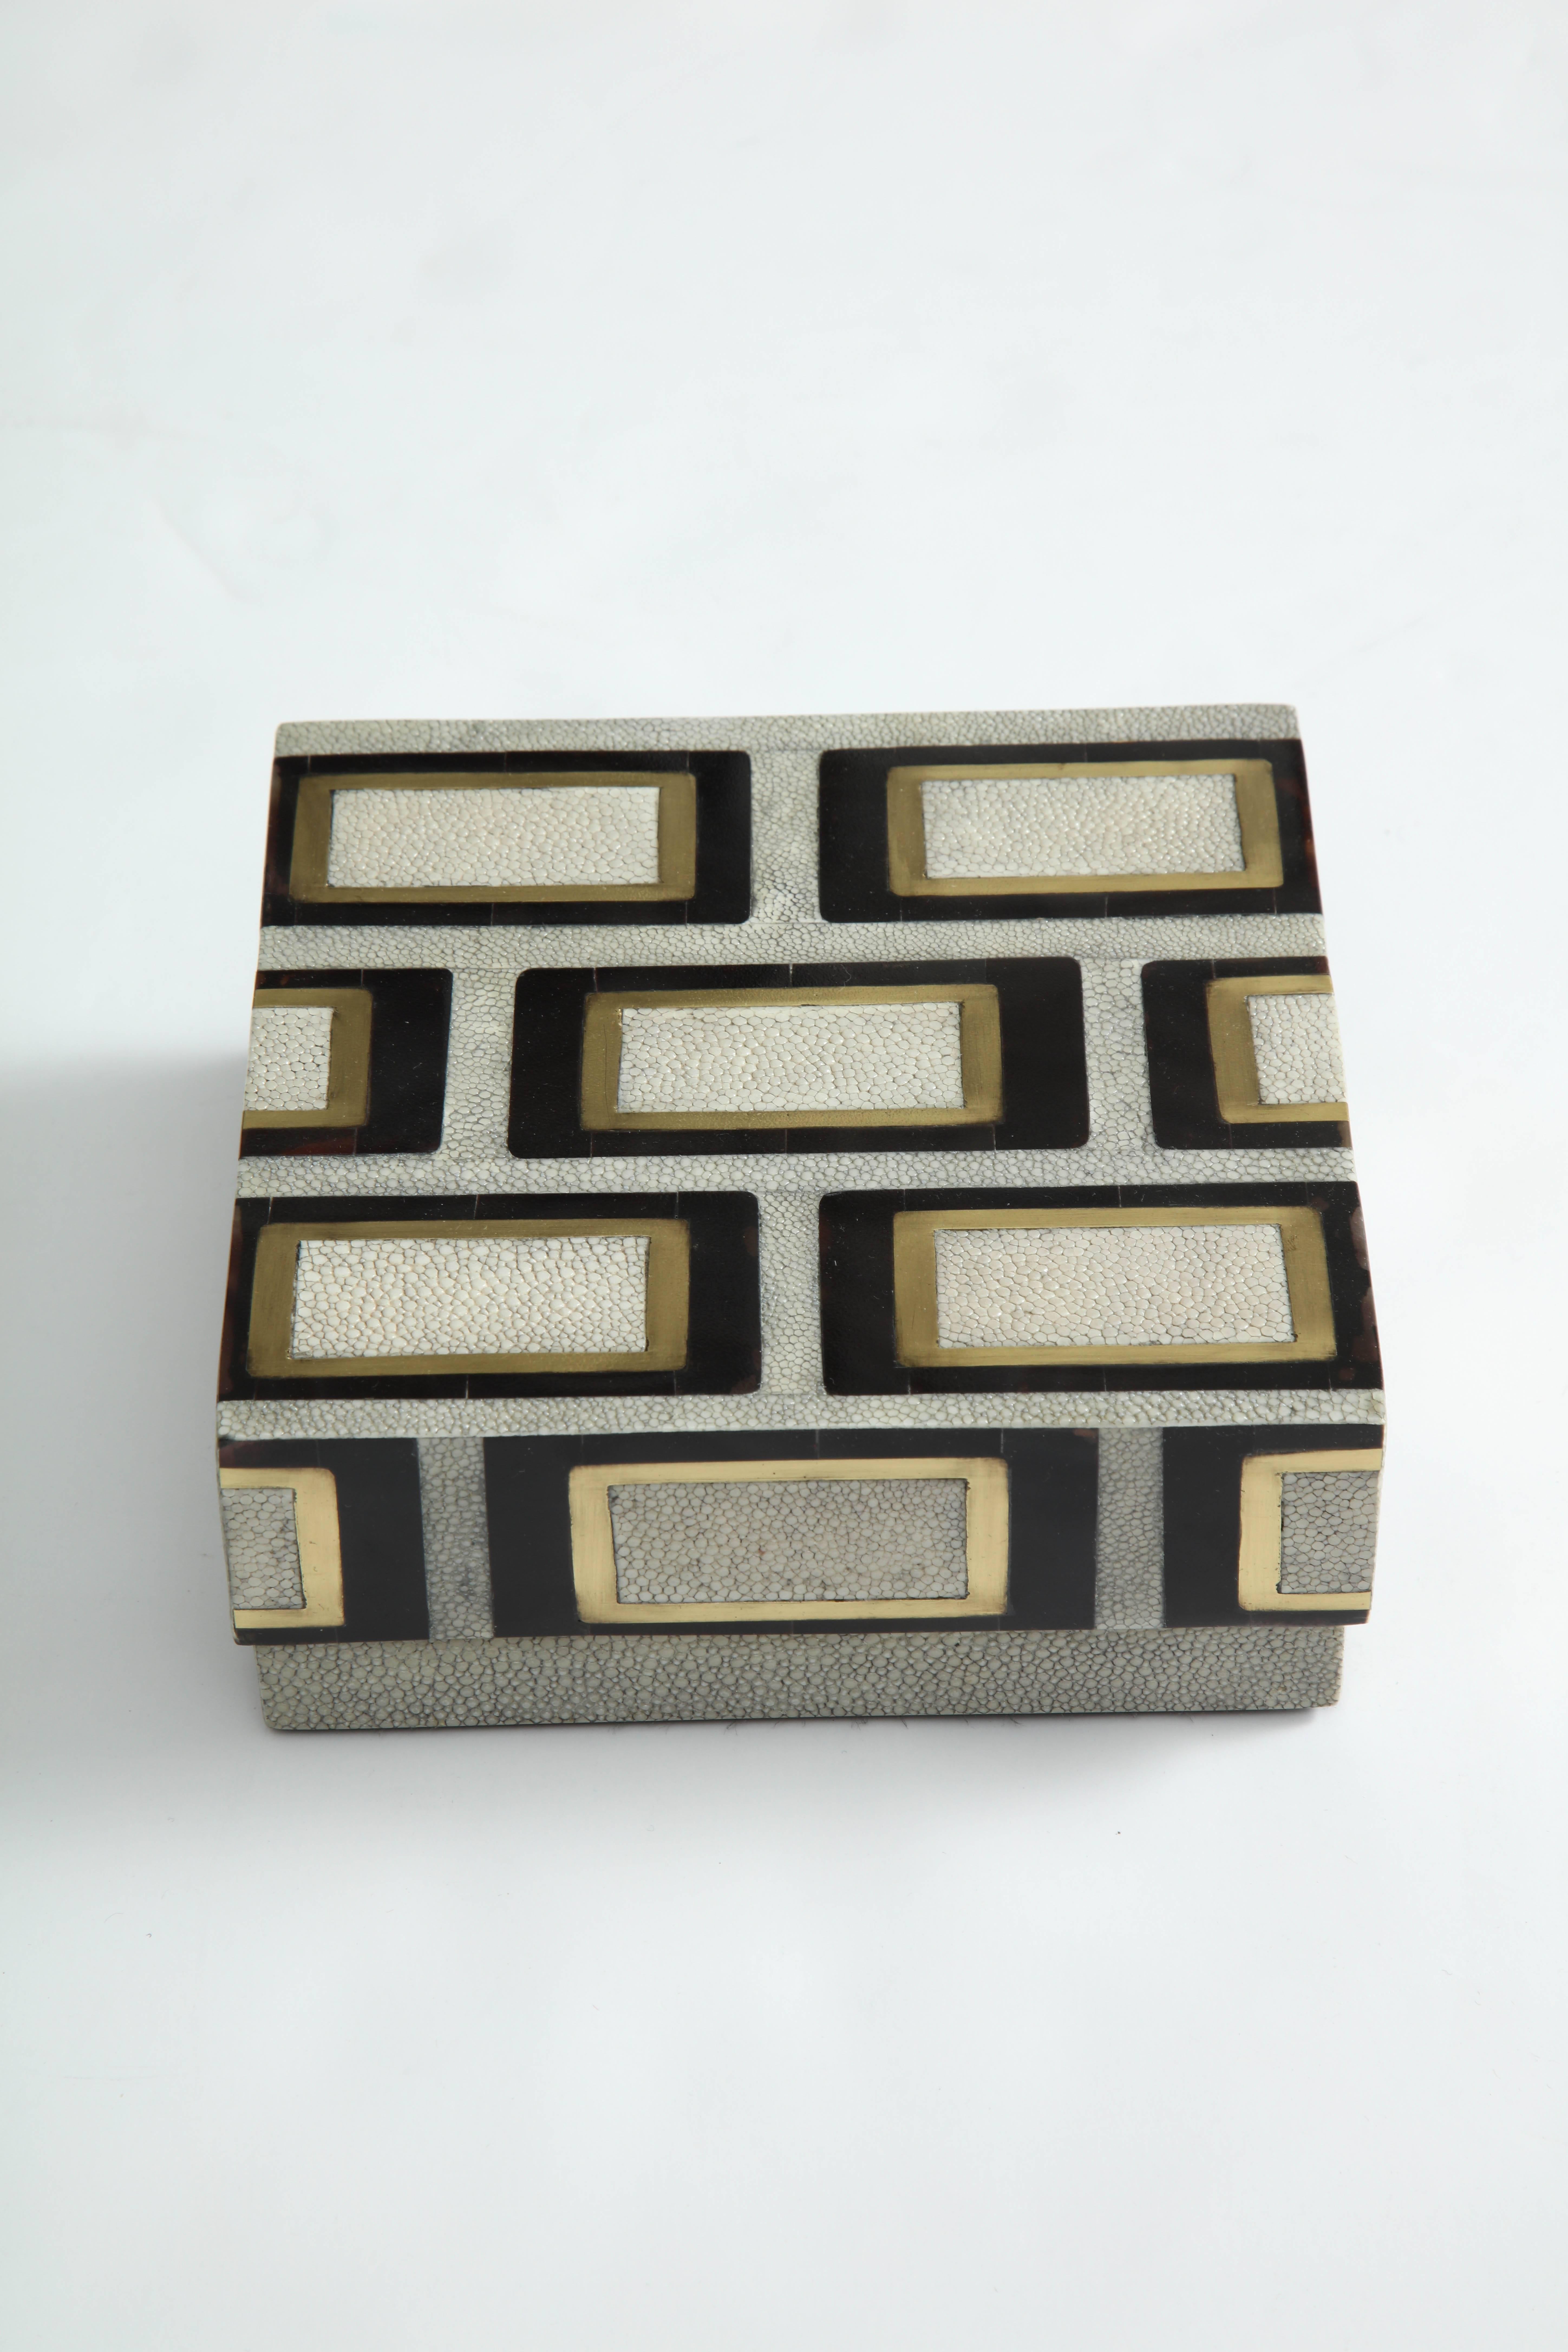 Decorative box made of shagreen, bronze and palm wood. Designed in France. Delivery time is about 15 weeks.